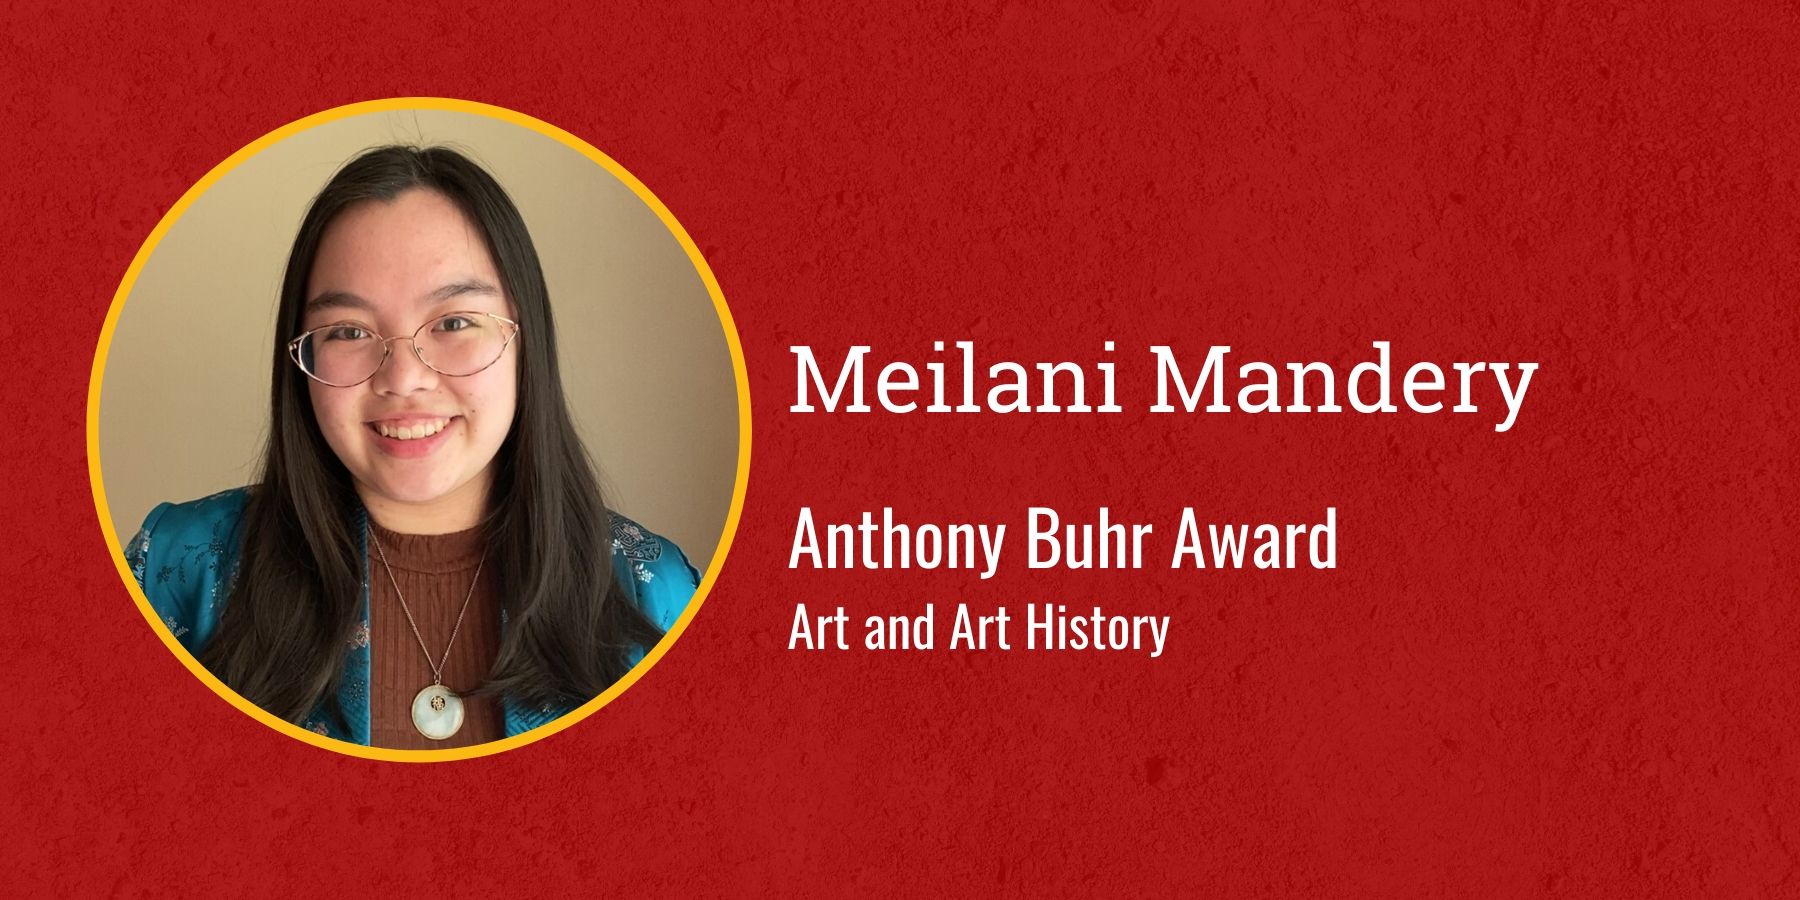 Photo of Meilani Mandery and text Anthony Buhr Award, Performing Arts and Arts Leadership